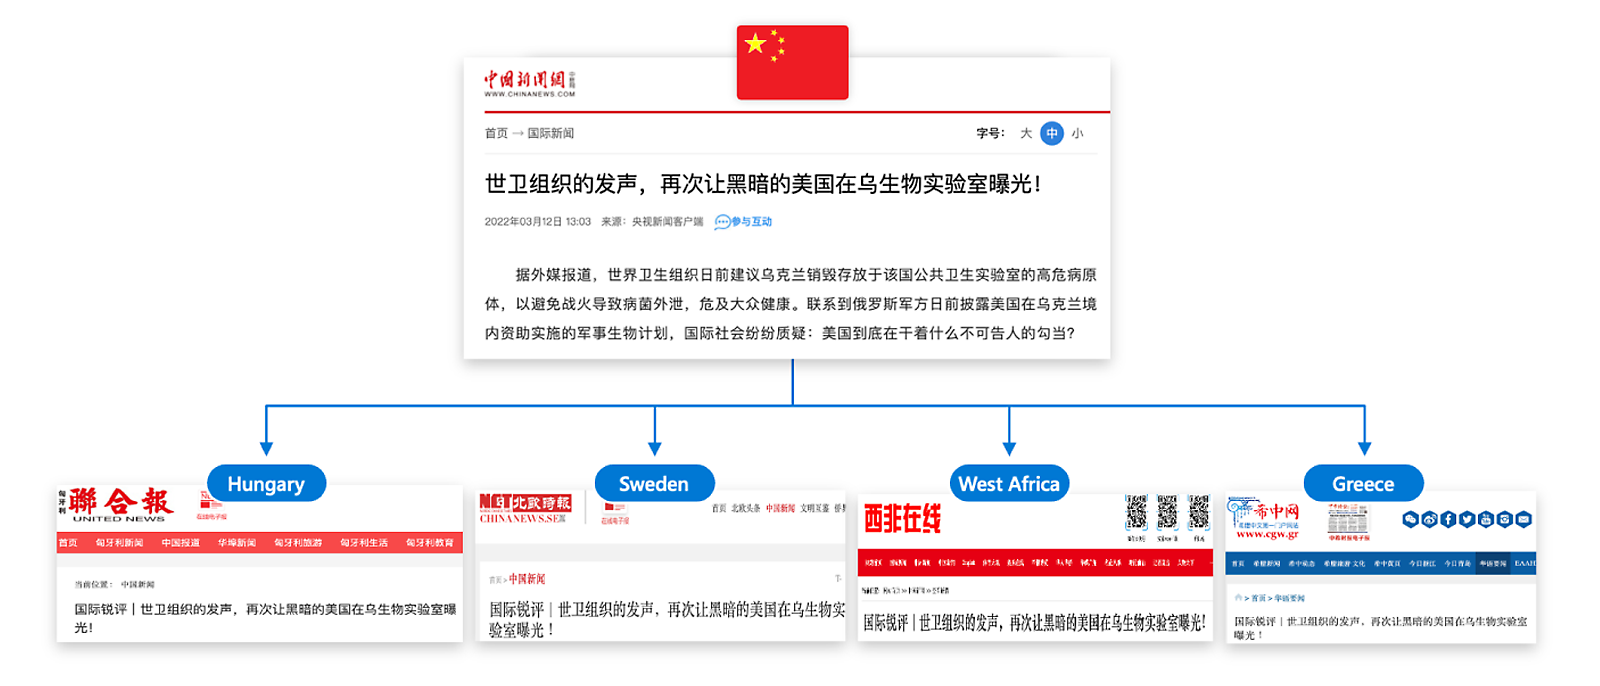 Screenshots of how a China News Service article was re-published across websites targeting audiences in Italy, Hungary, Russia, and Greece